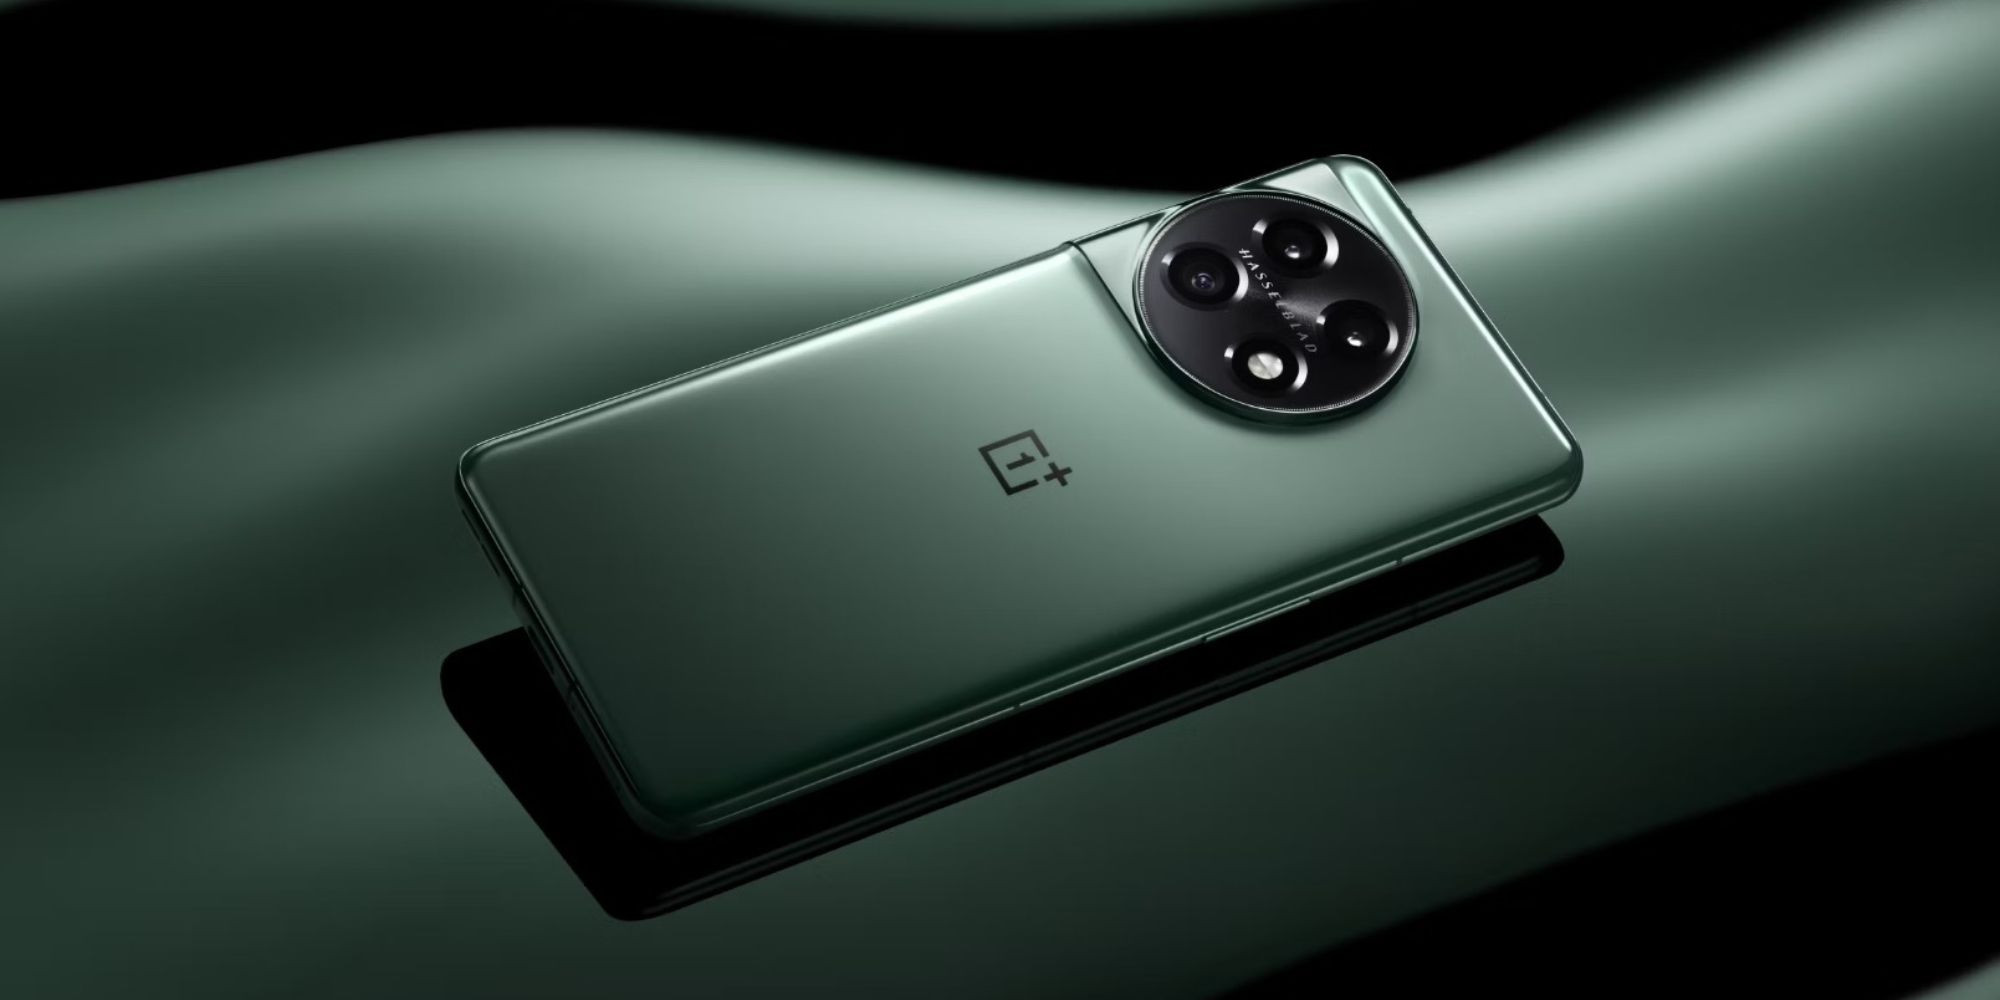 OnePlus 11 official teaser image showing the device in green